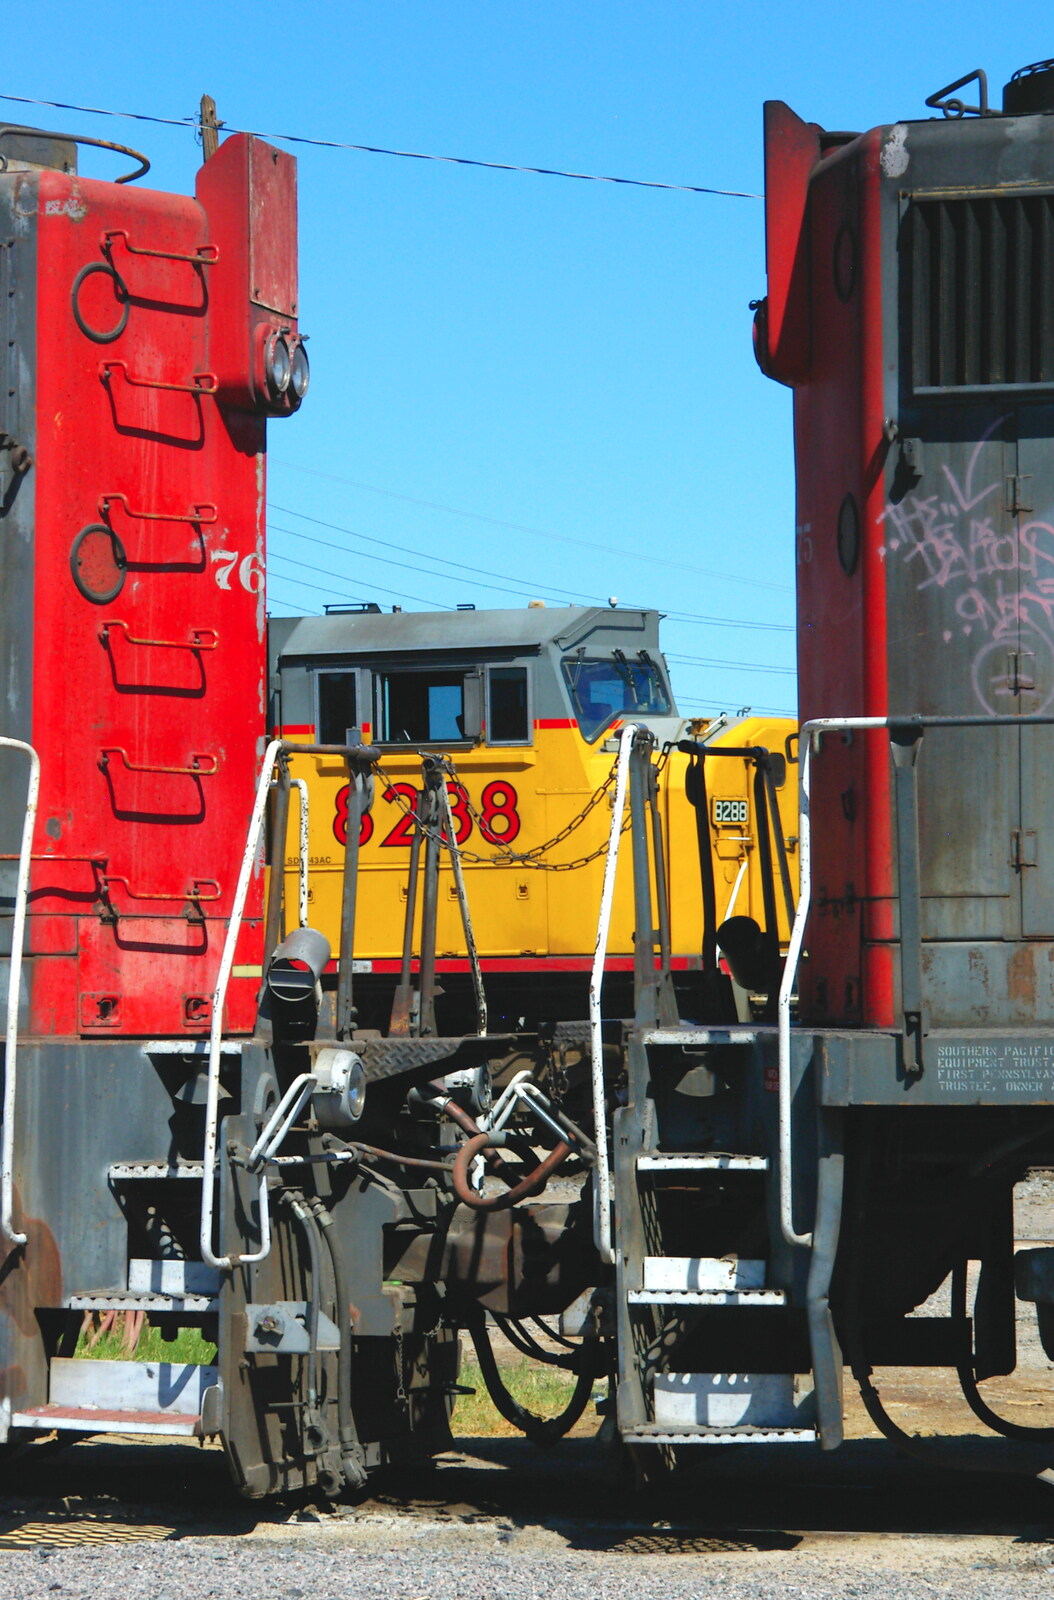 A loco between some other engines from California Desert: El Centro, Imperial Valley, California, US - 24th September 2005